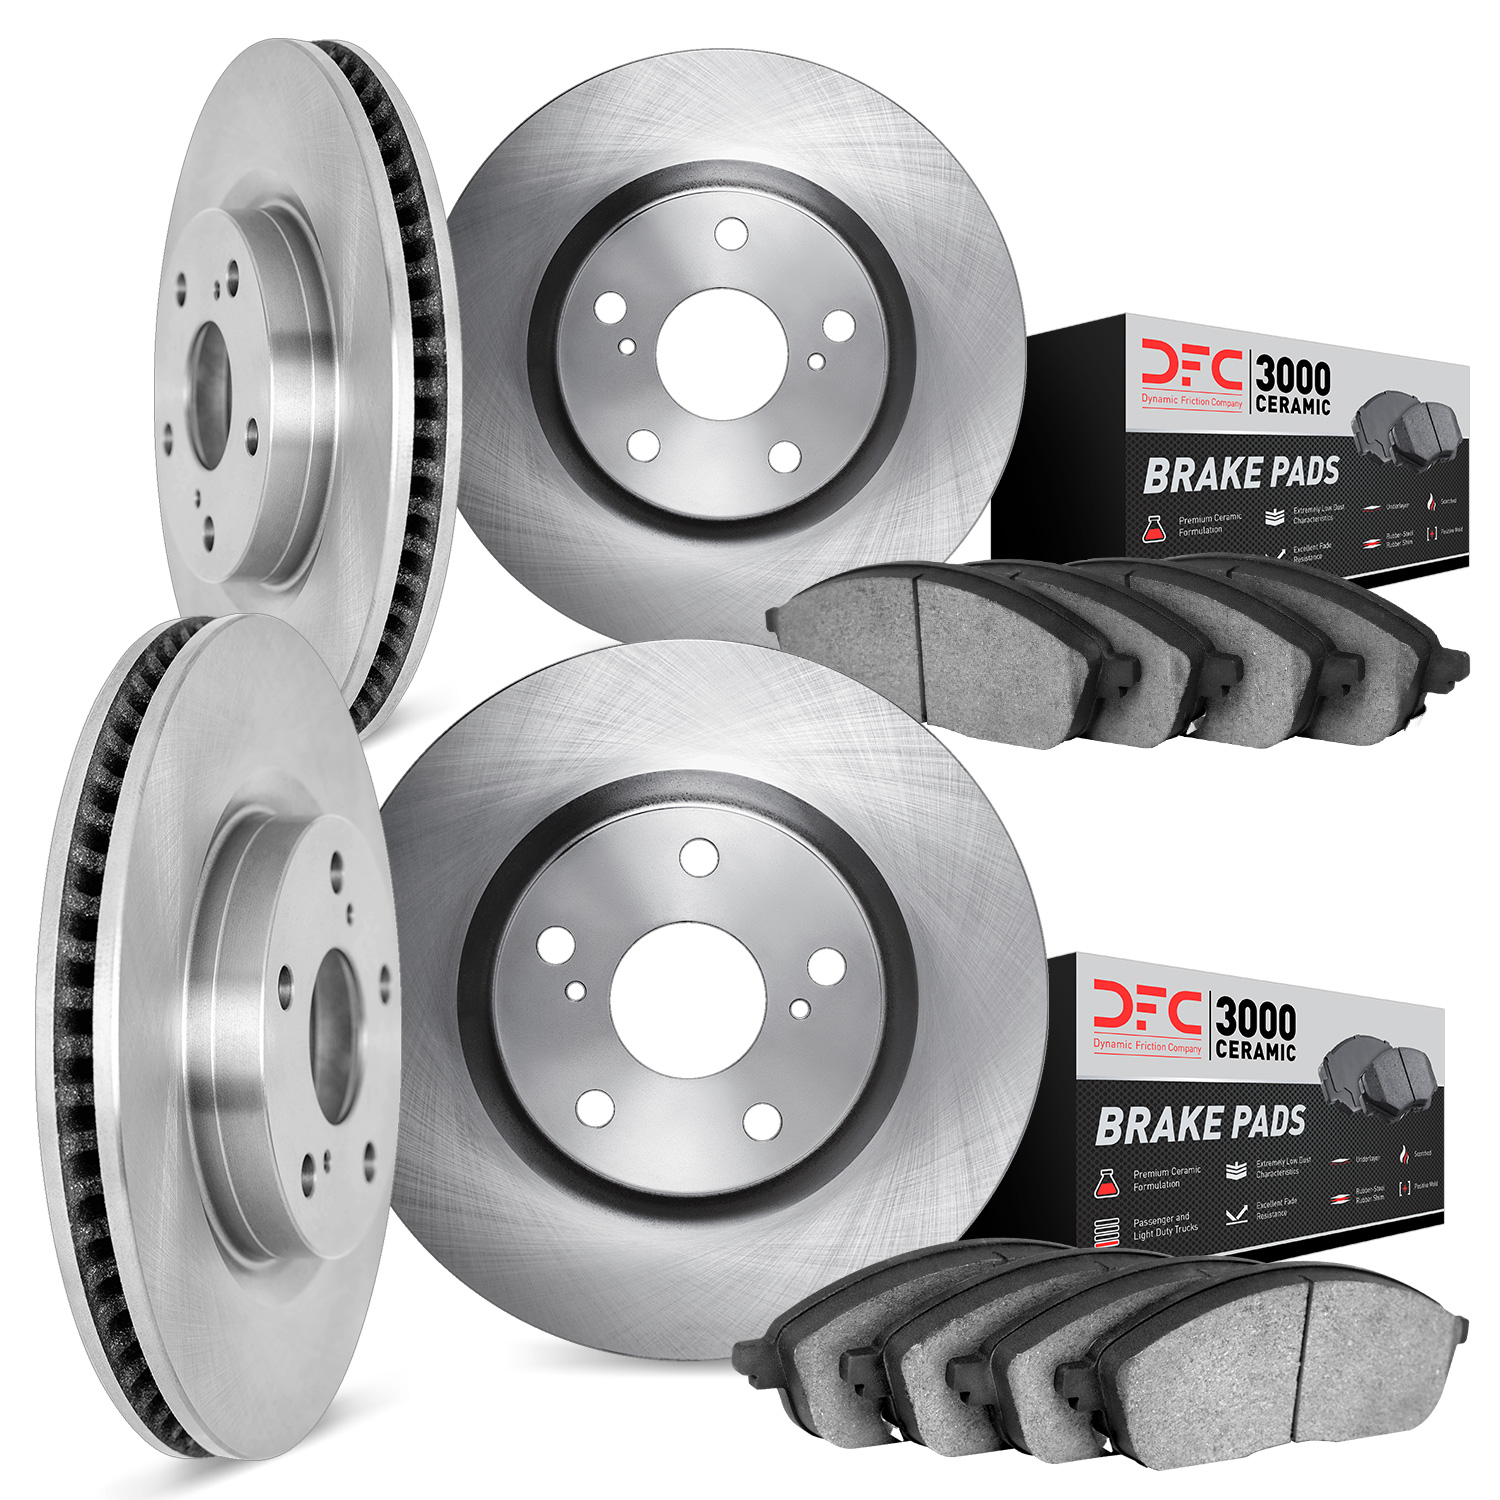 6304-31050 Brake Rotors with 3000-Series Ceramic Brake Pads Kit, 2006-2010 BMW, Position: Front and Rear